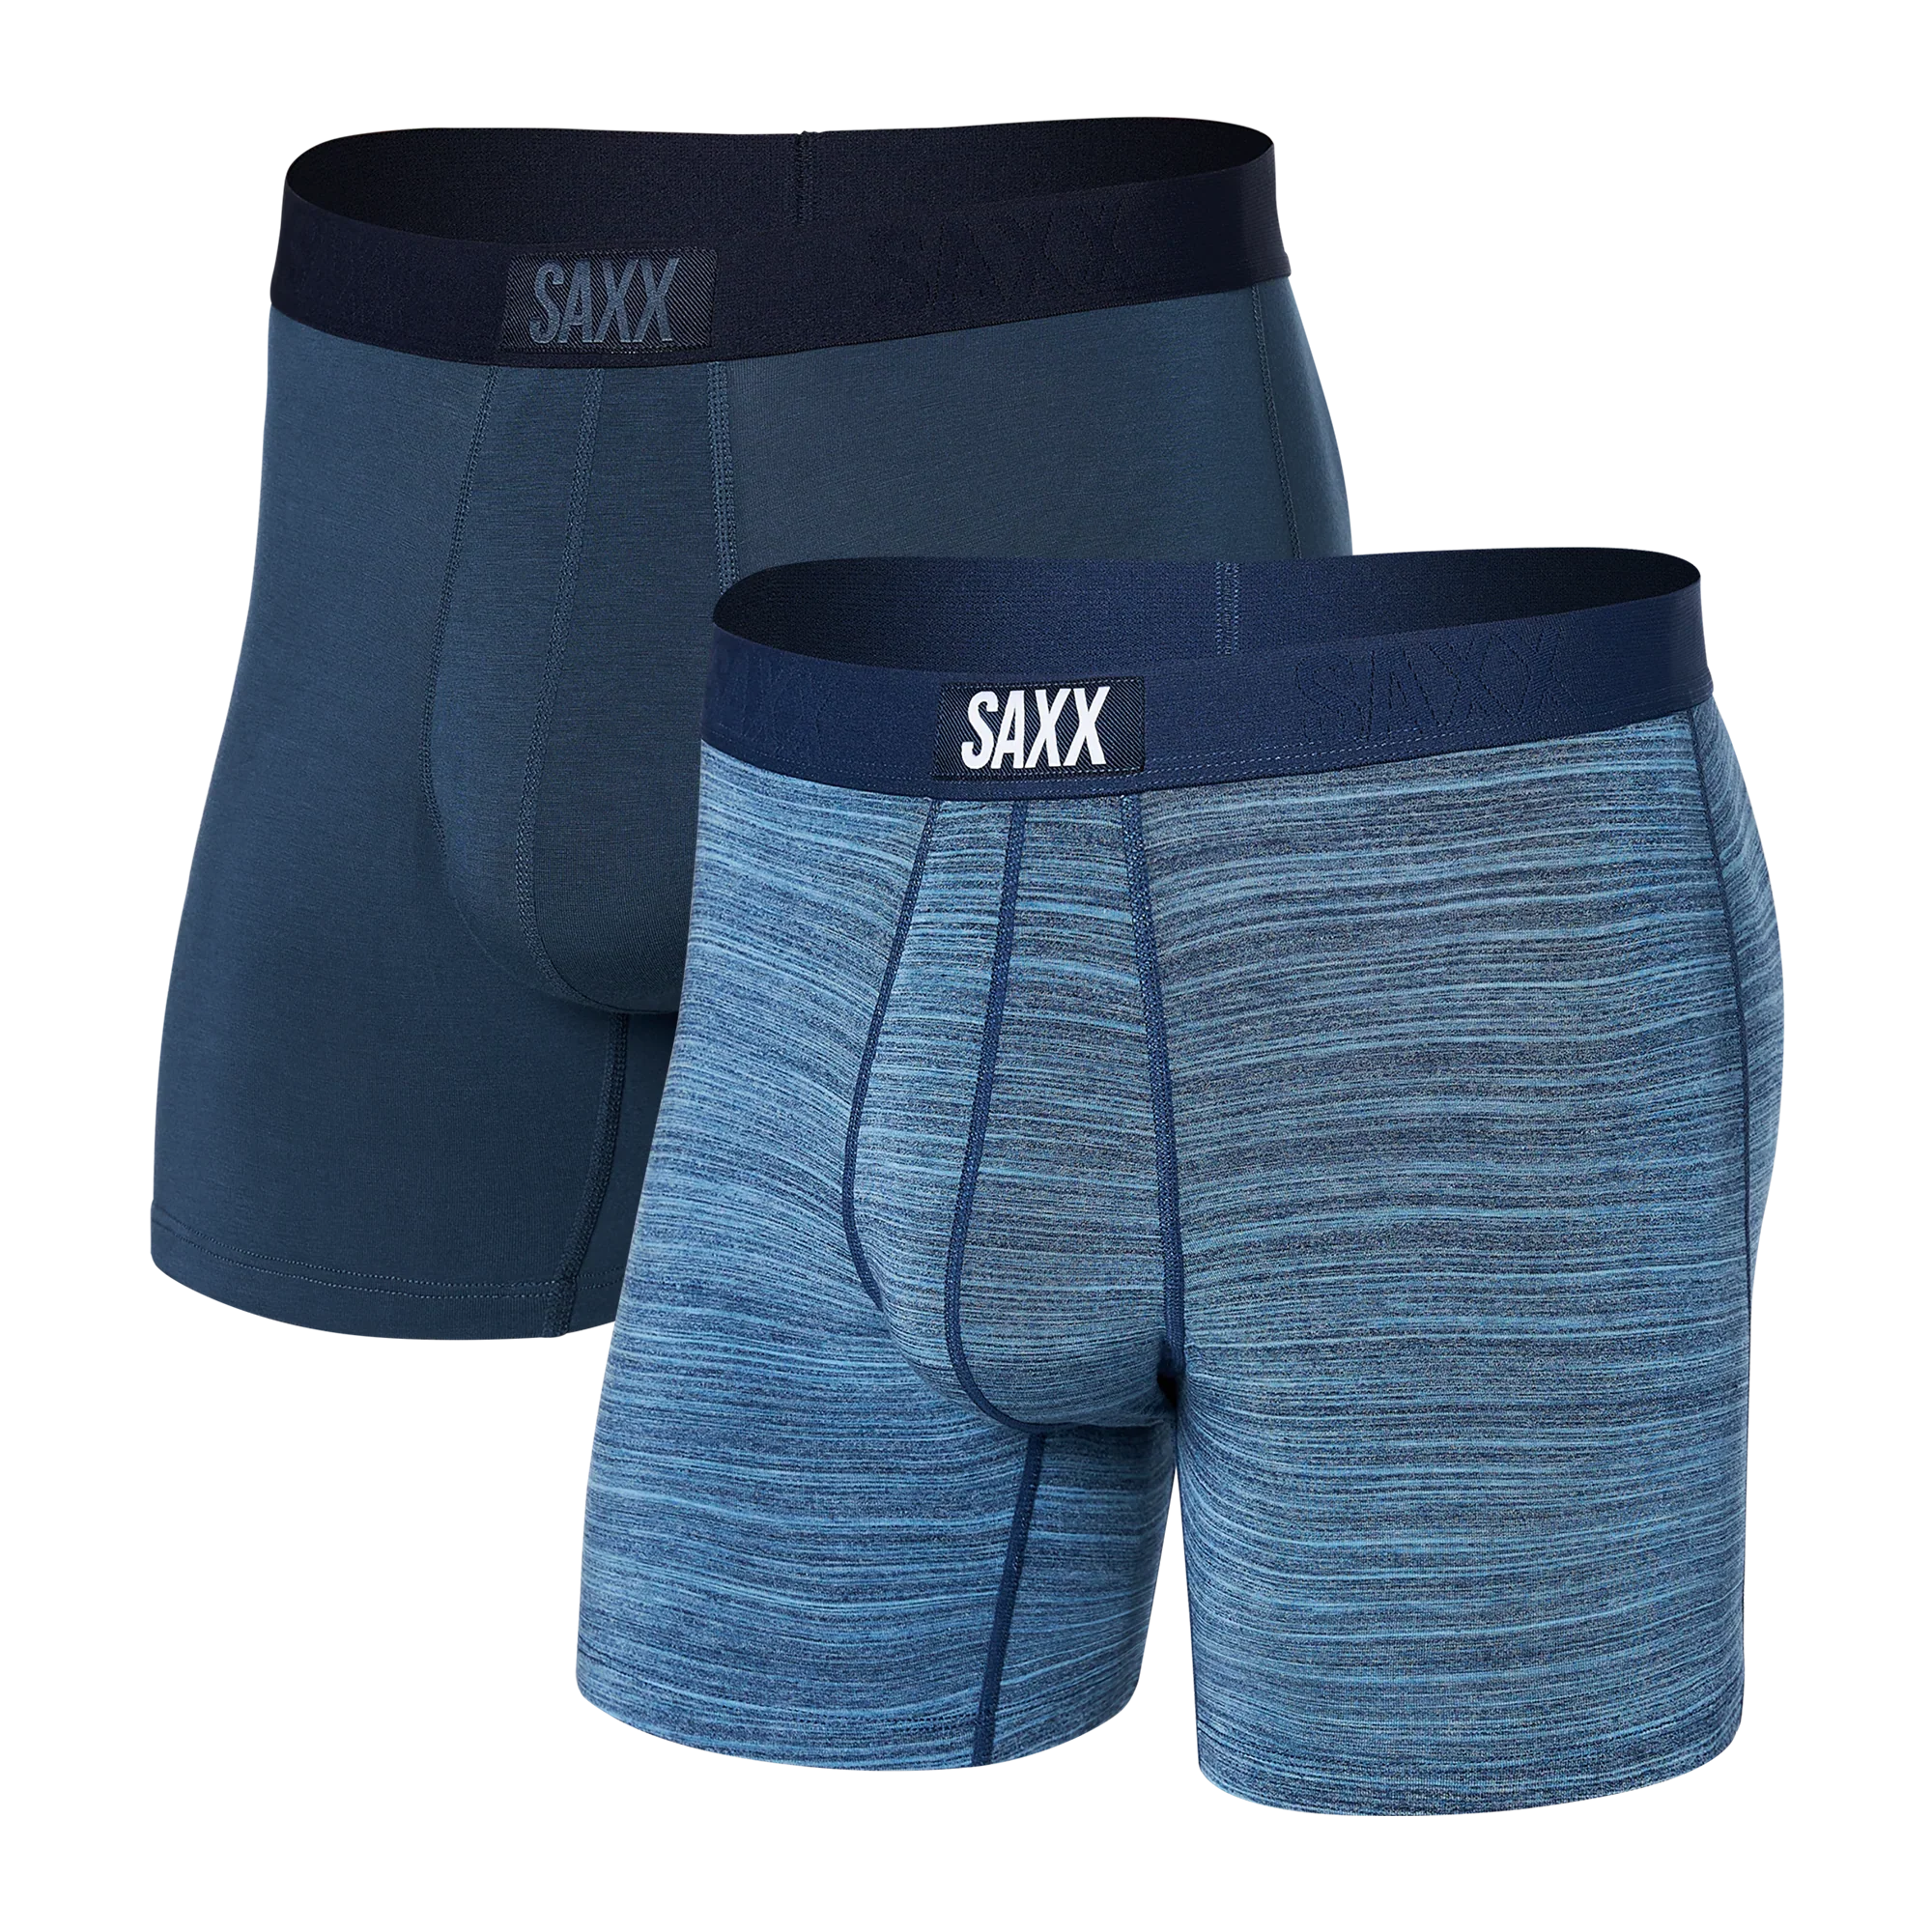 'SAXX Vibe 2-Pack Boxer Briefs - Space Dye Heather/Navy' in 'Space Dye Heather/Navy' colour